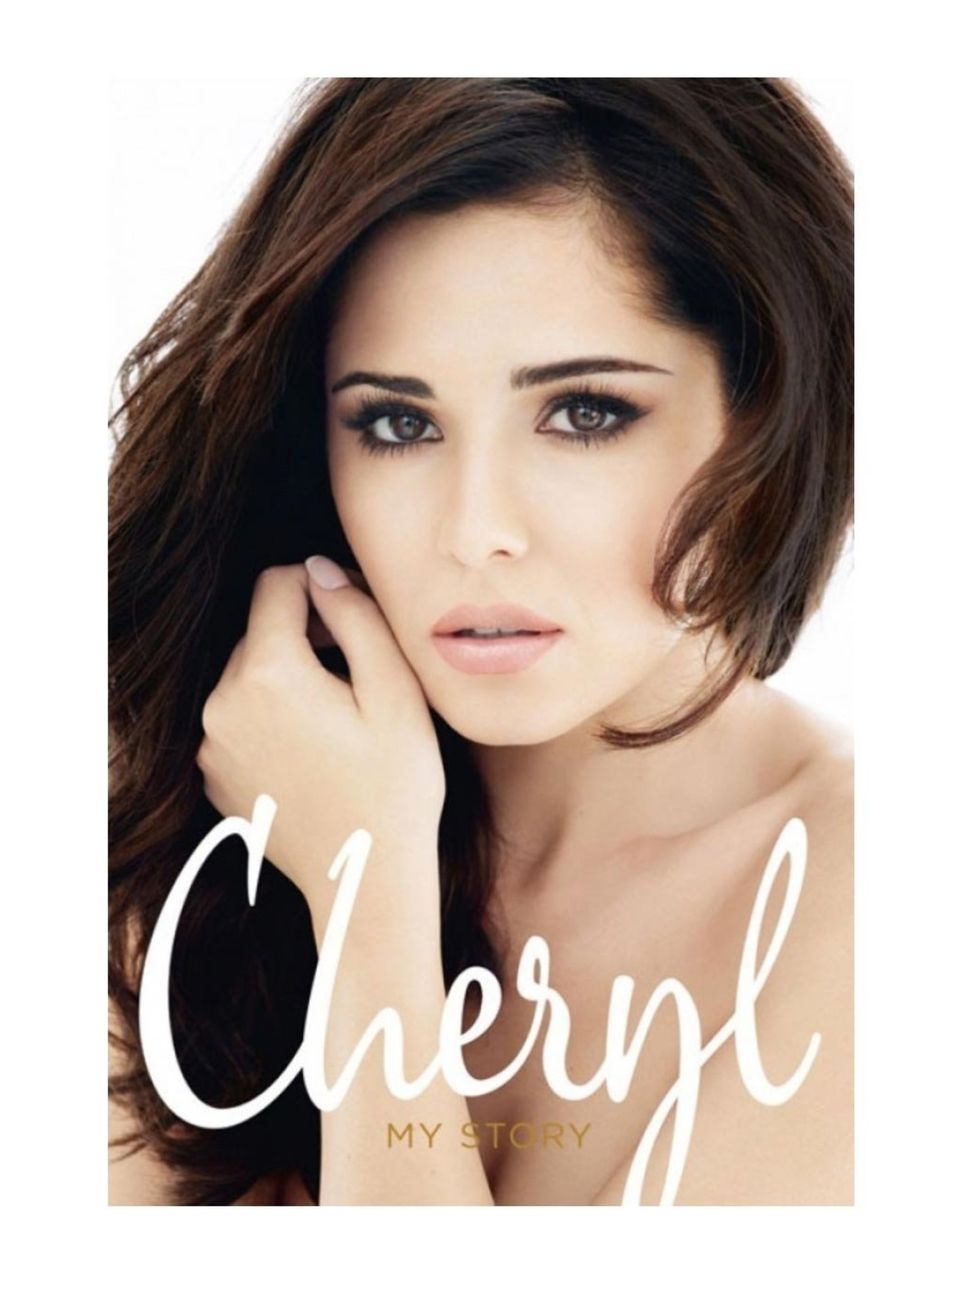 <p>Cheryl My Story, £8 (<a href="http://www.amazon.co.uk/Cheryl-My-Story-Cole/dp/0007500157">Amazon</a>), because apparently he has a crush on her...</p>